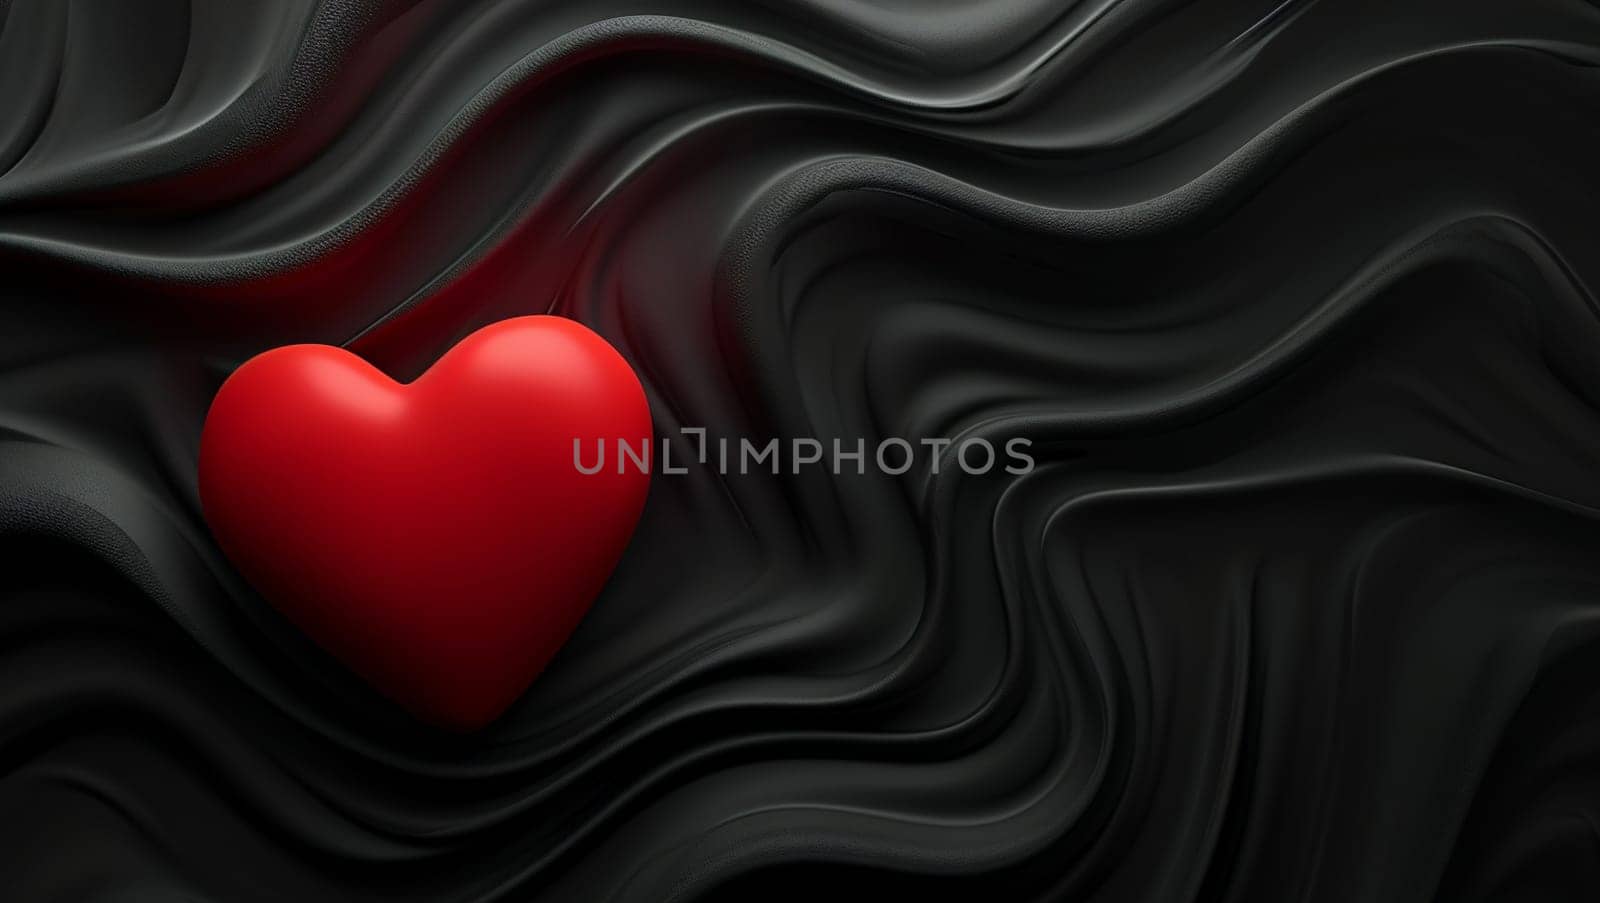 Red heart on a black, cloth background. Black waves of fabric flow through the heart. Stylish image. High quality photo